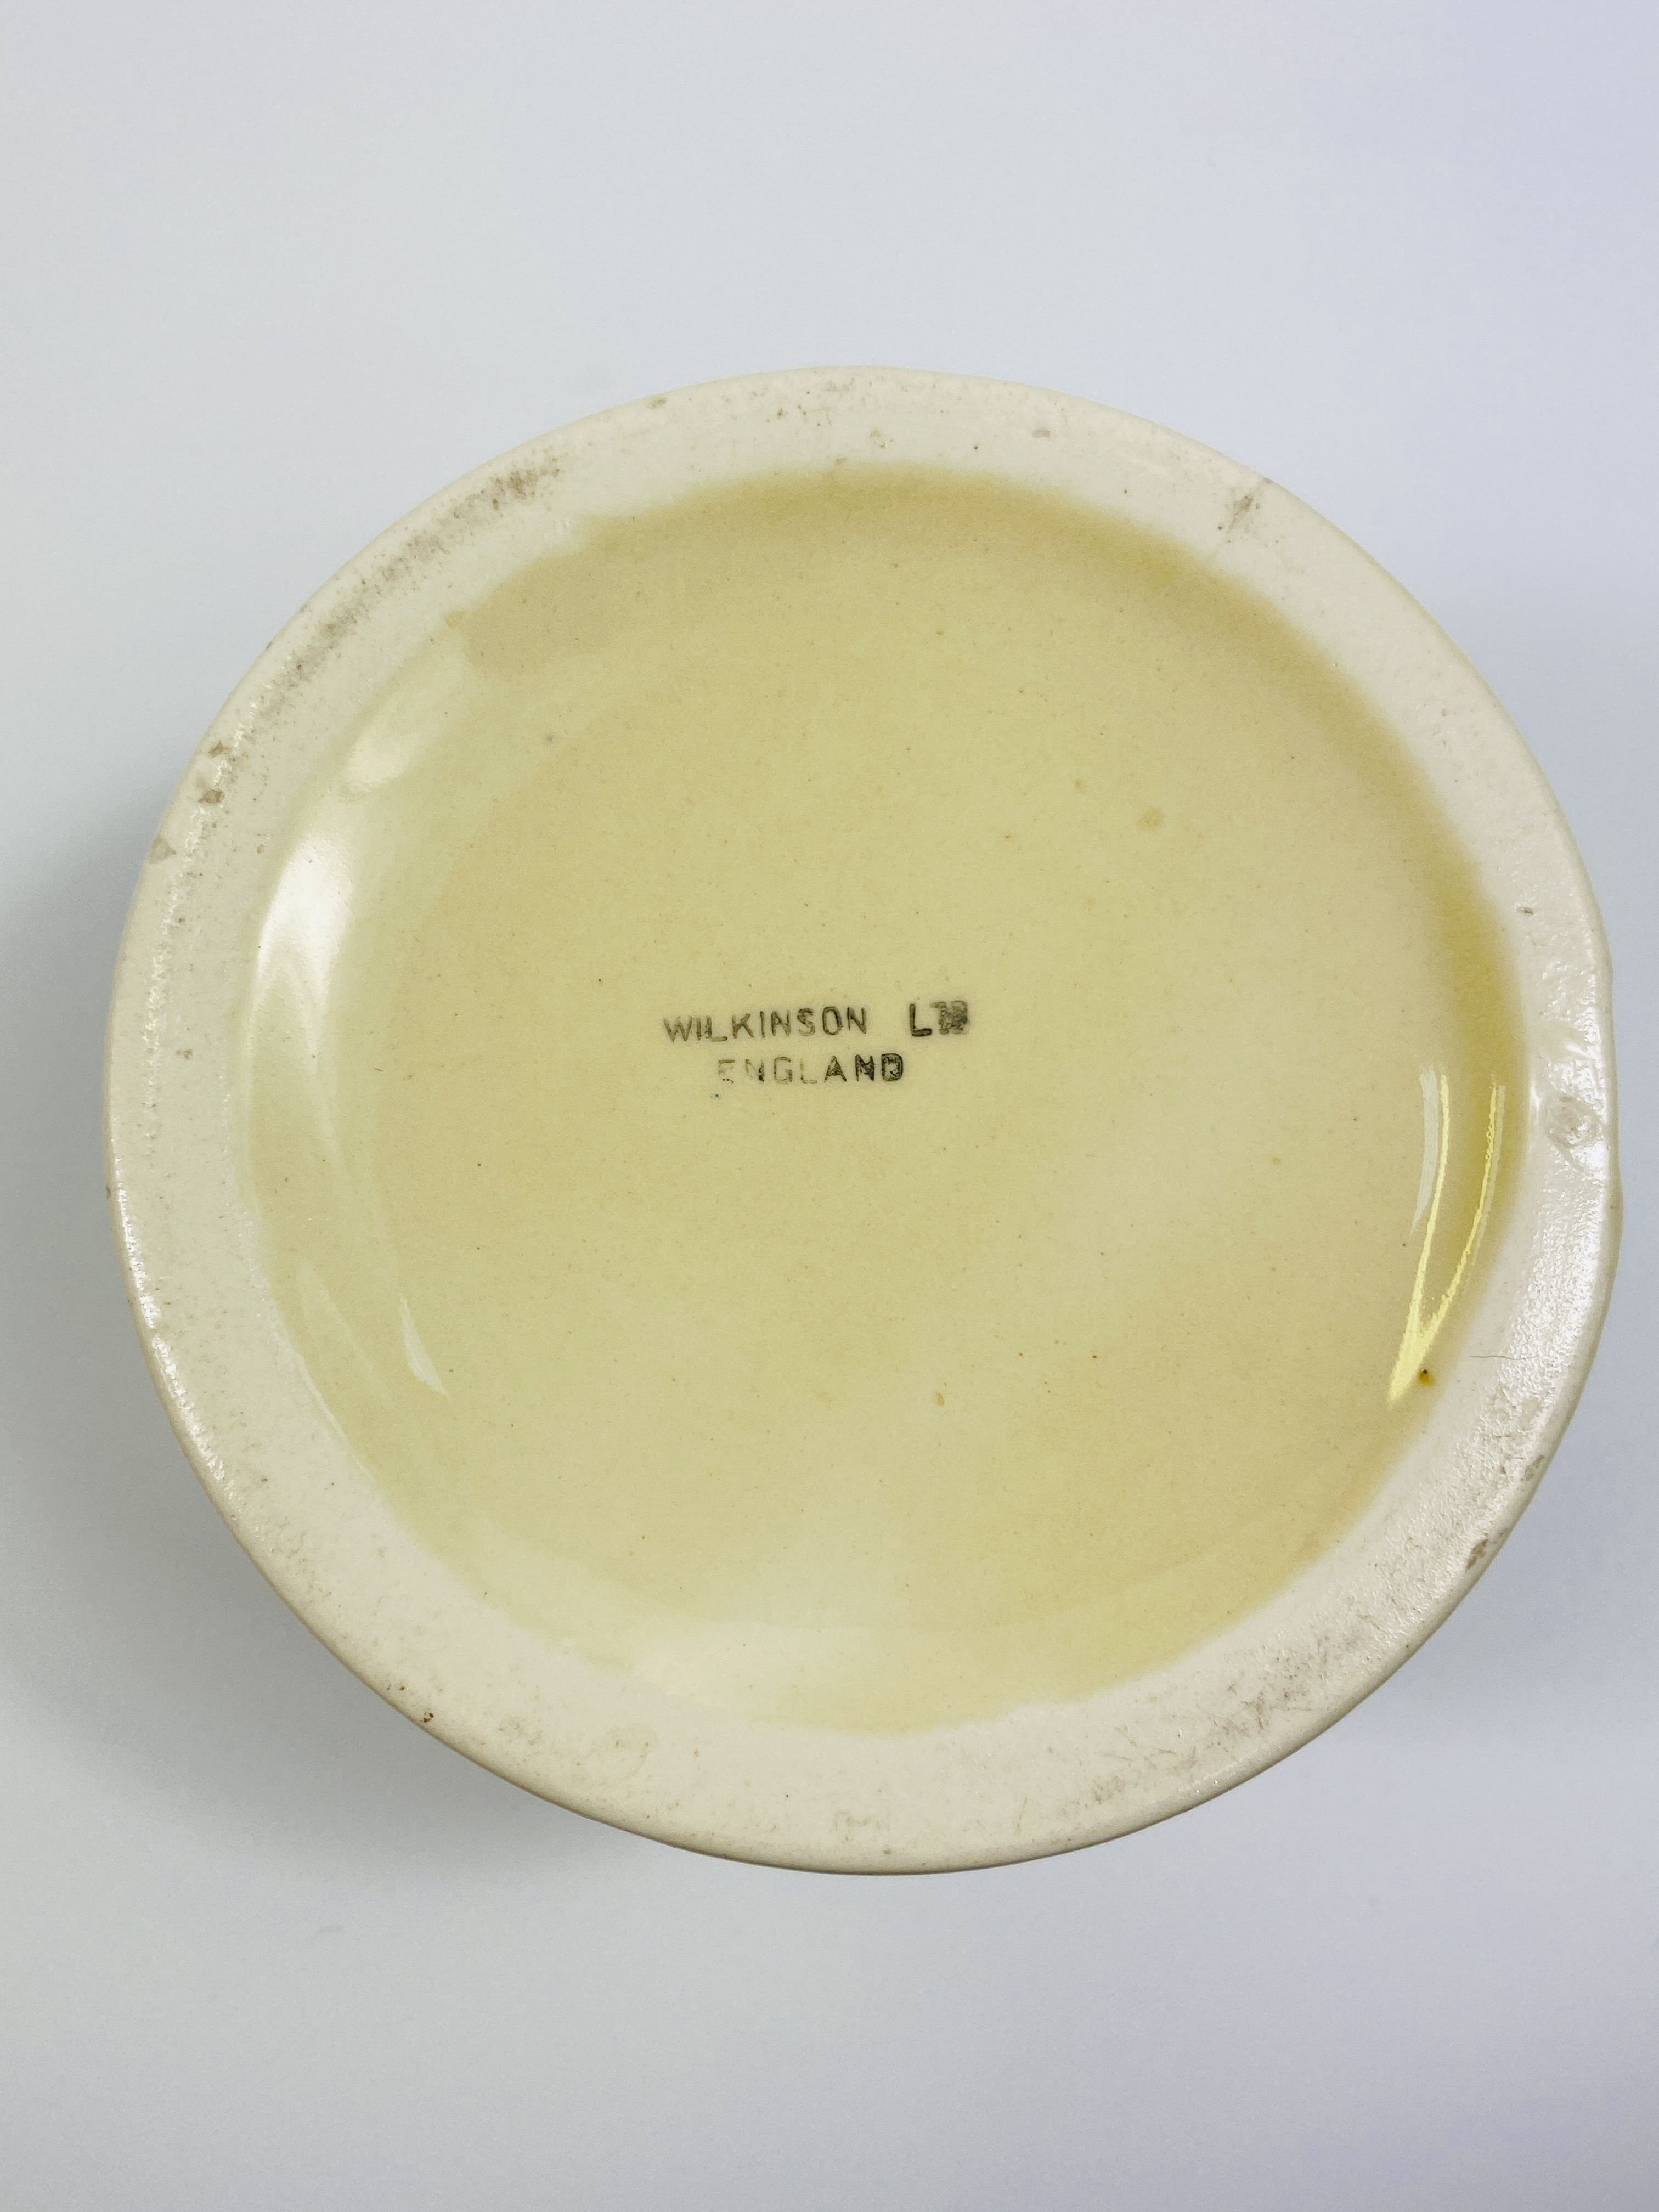 Wilkinson Lts honey pot on Clarice Cliff saucer - Image 6 of 6